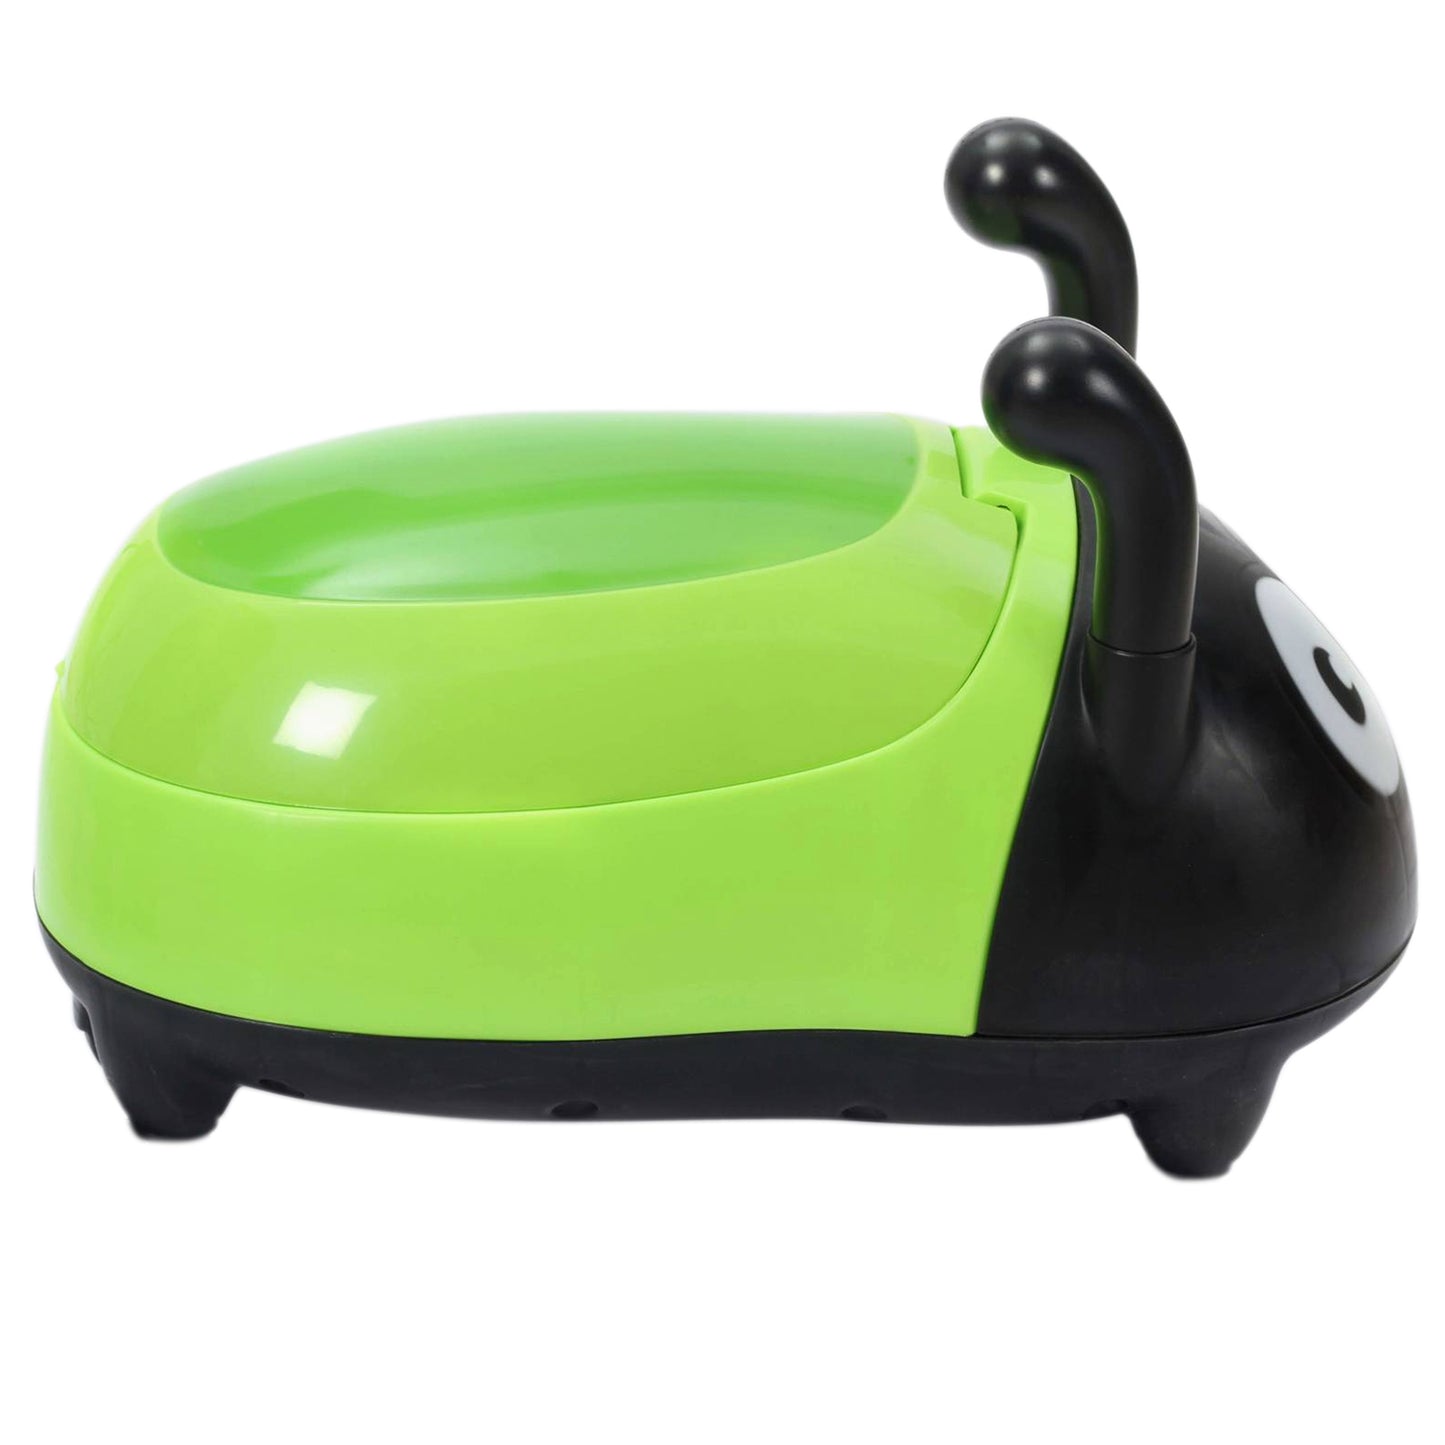 Insect Shaped Potty Trainer(Without Packing)